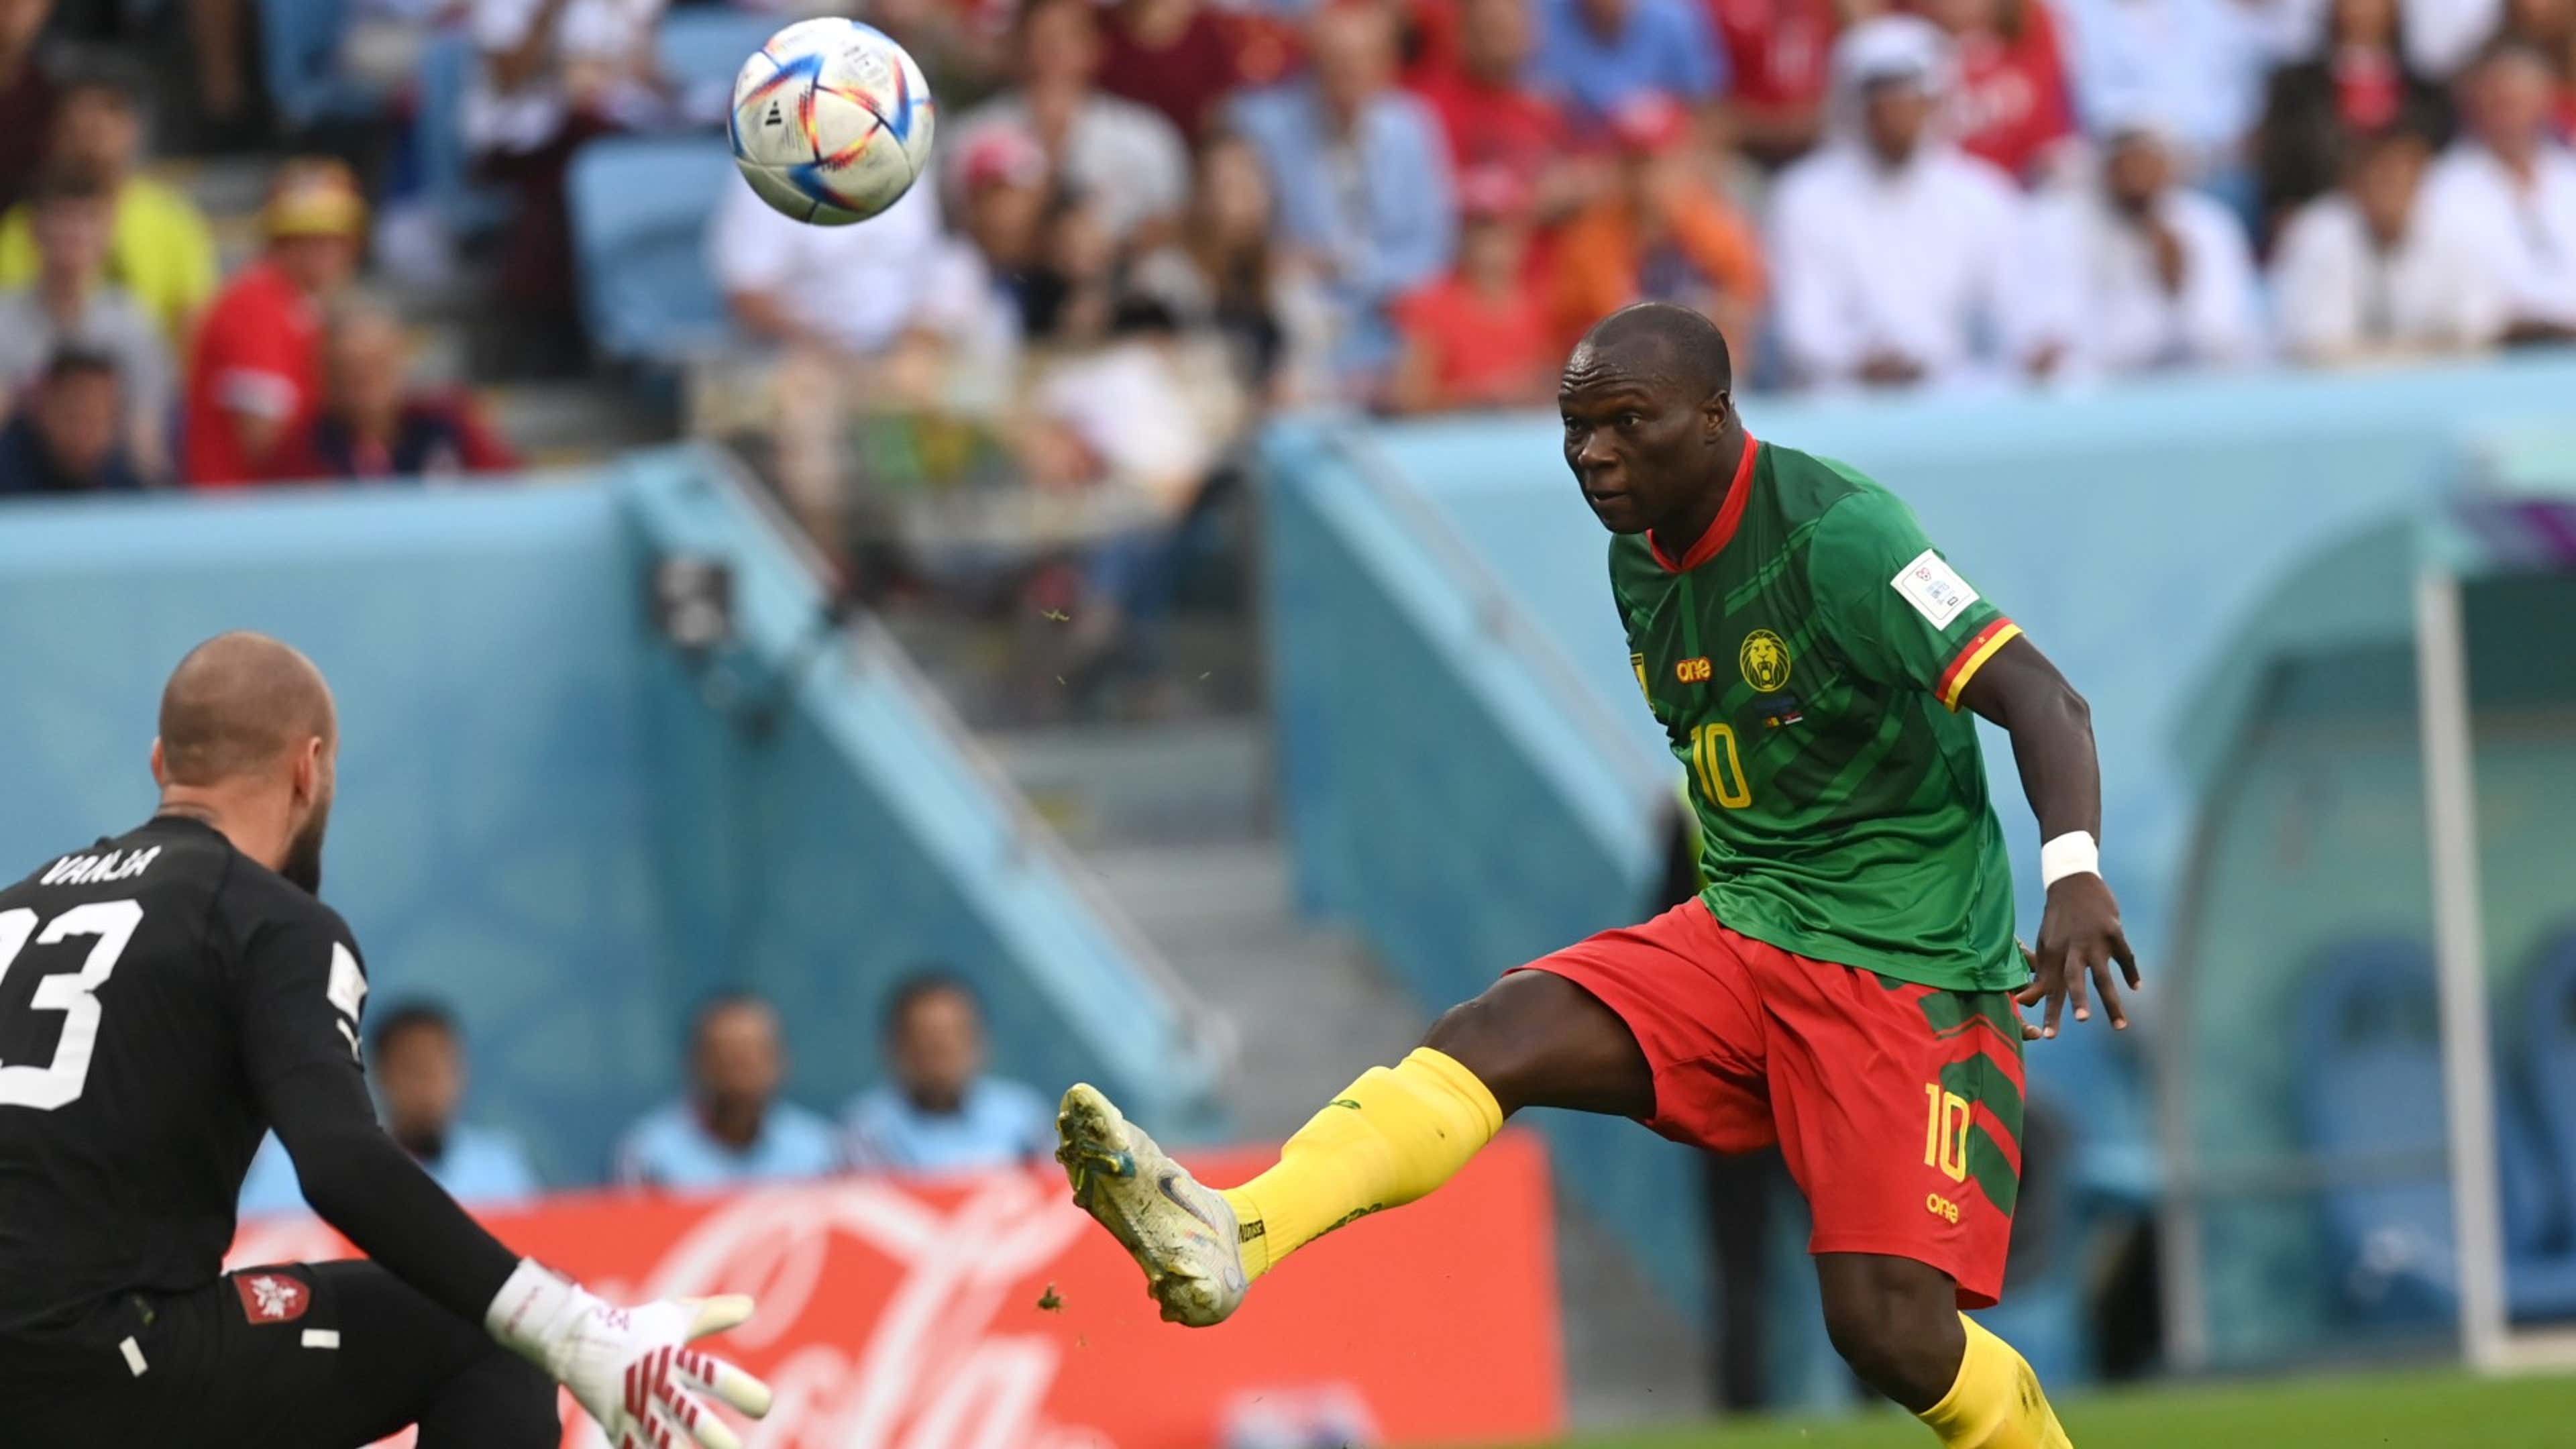 Cameroon v Serbia - as it happened